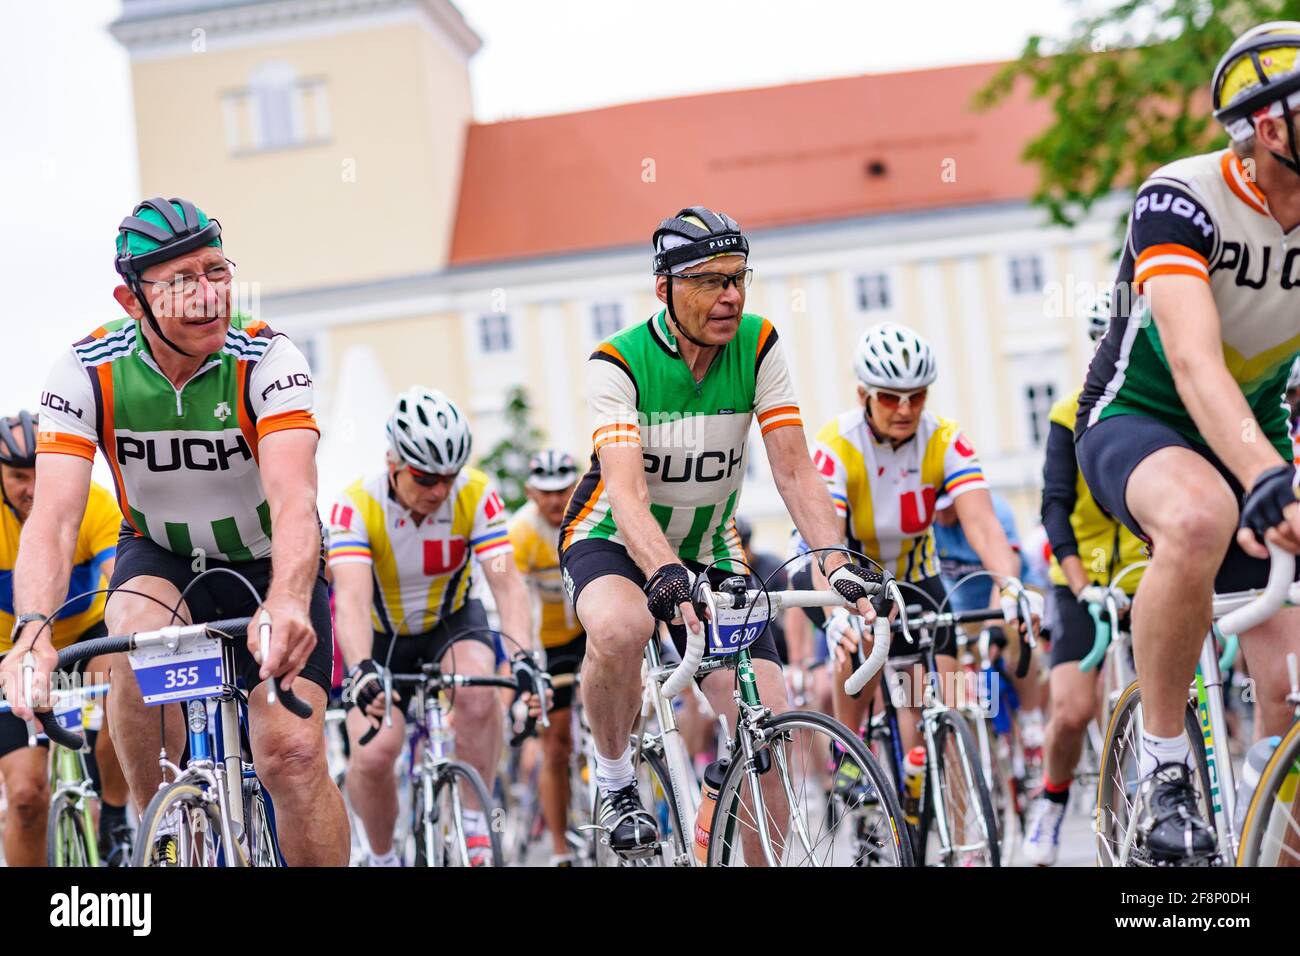 wolkersdorf, austria, 12 june 2016, competitors of the former puch racing  team at the vintage bicycle event in velo veritas Stock Photo - Alamy